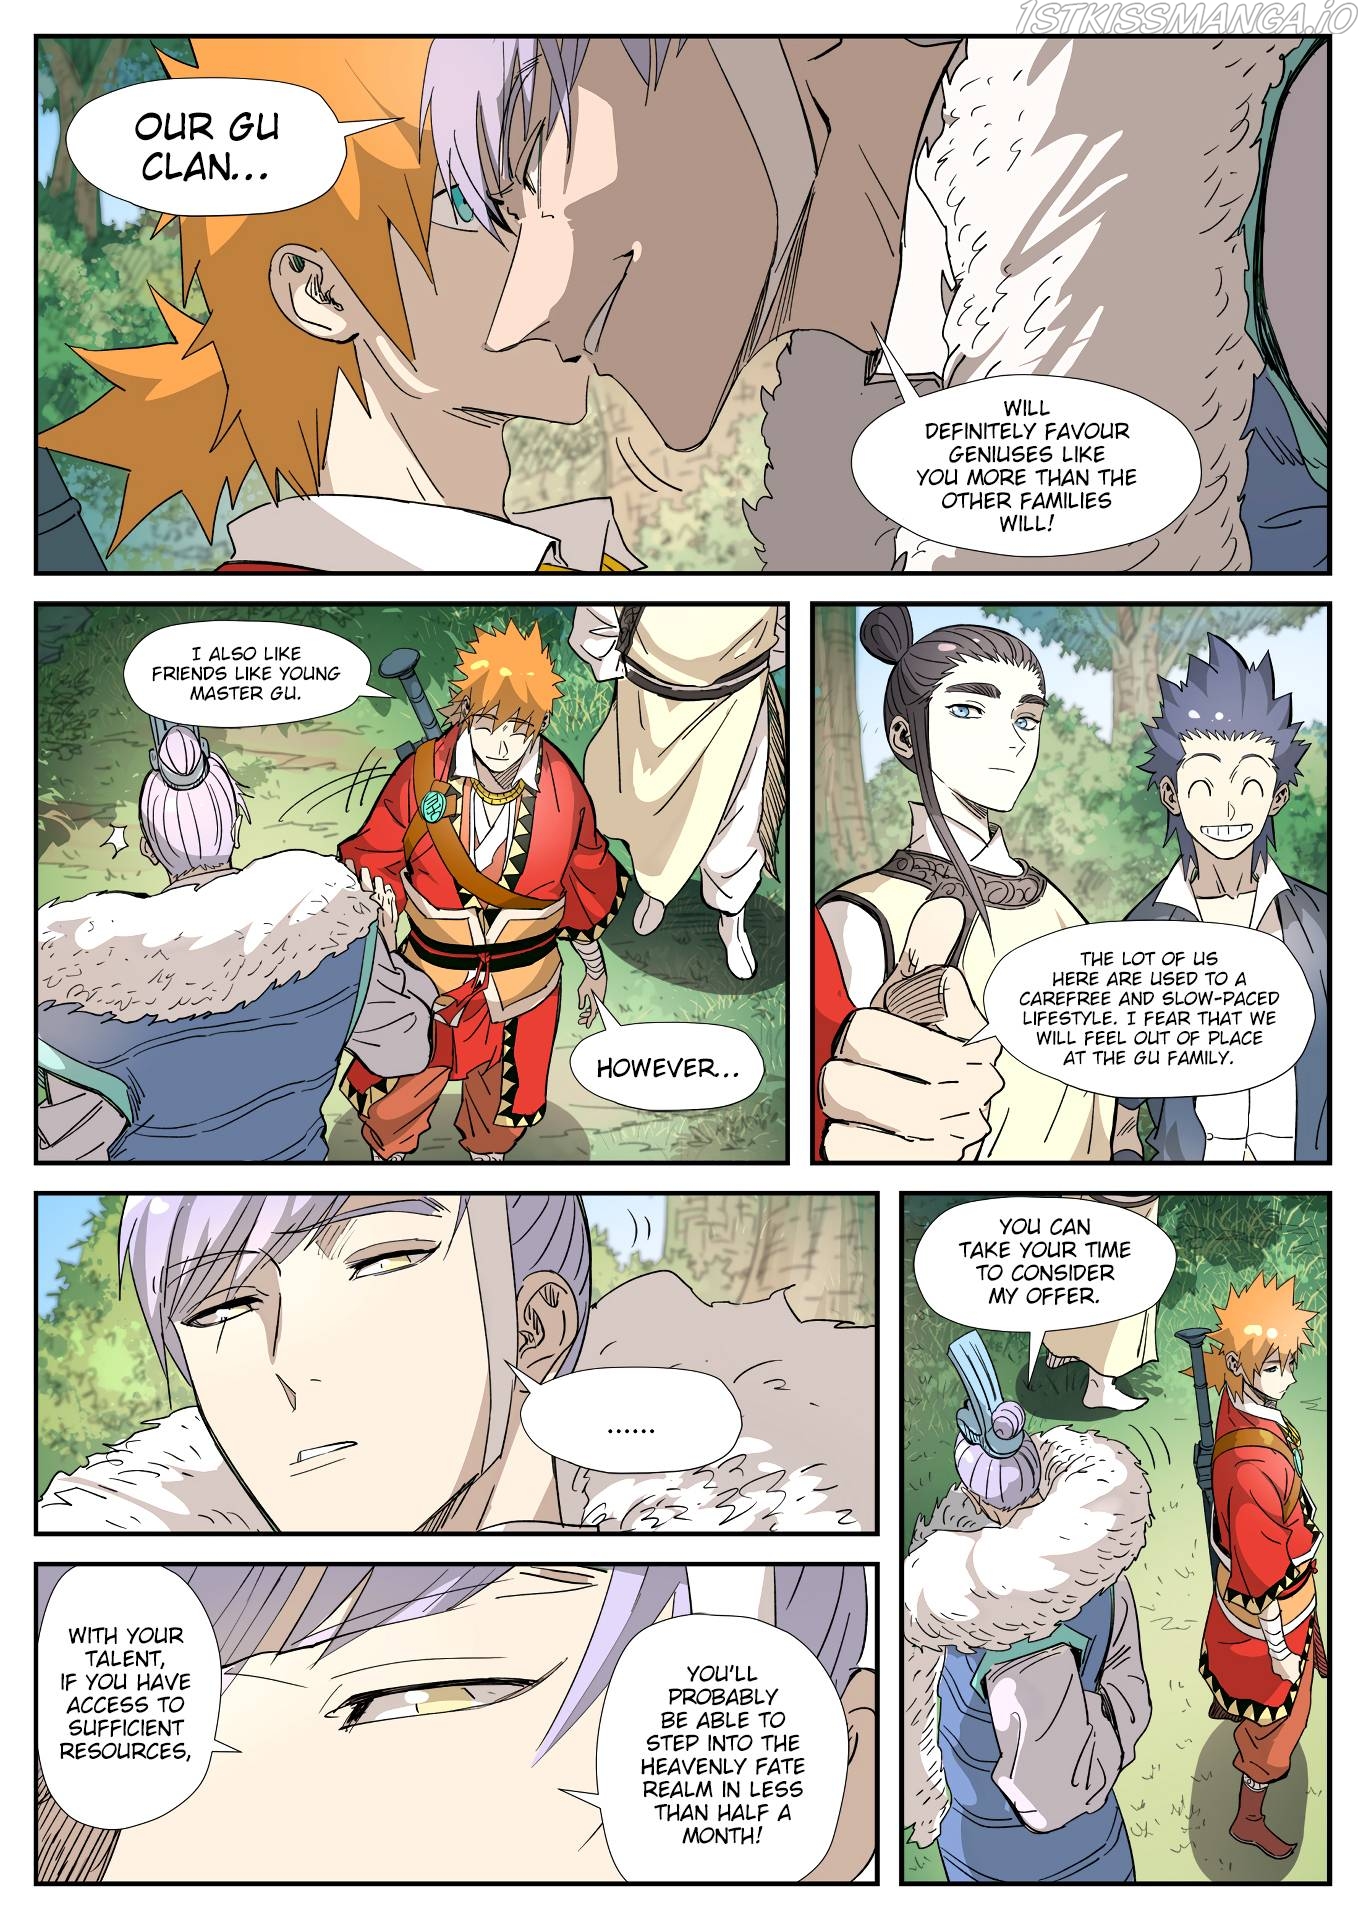 Tales of Demons and Gods Manhua Chapter 318.5 - Page 6